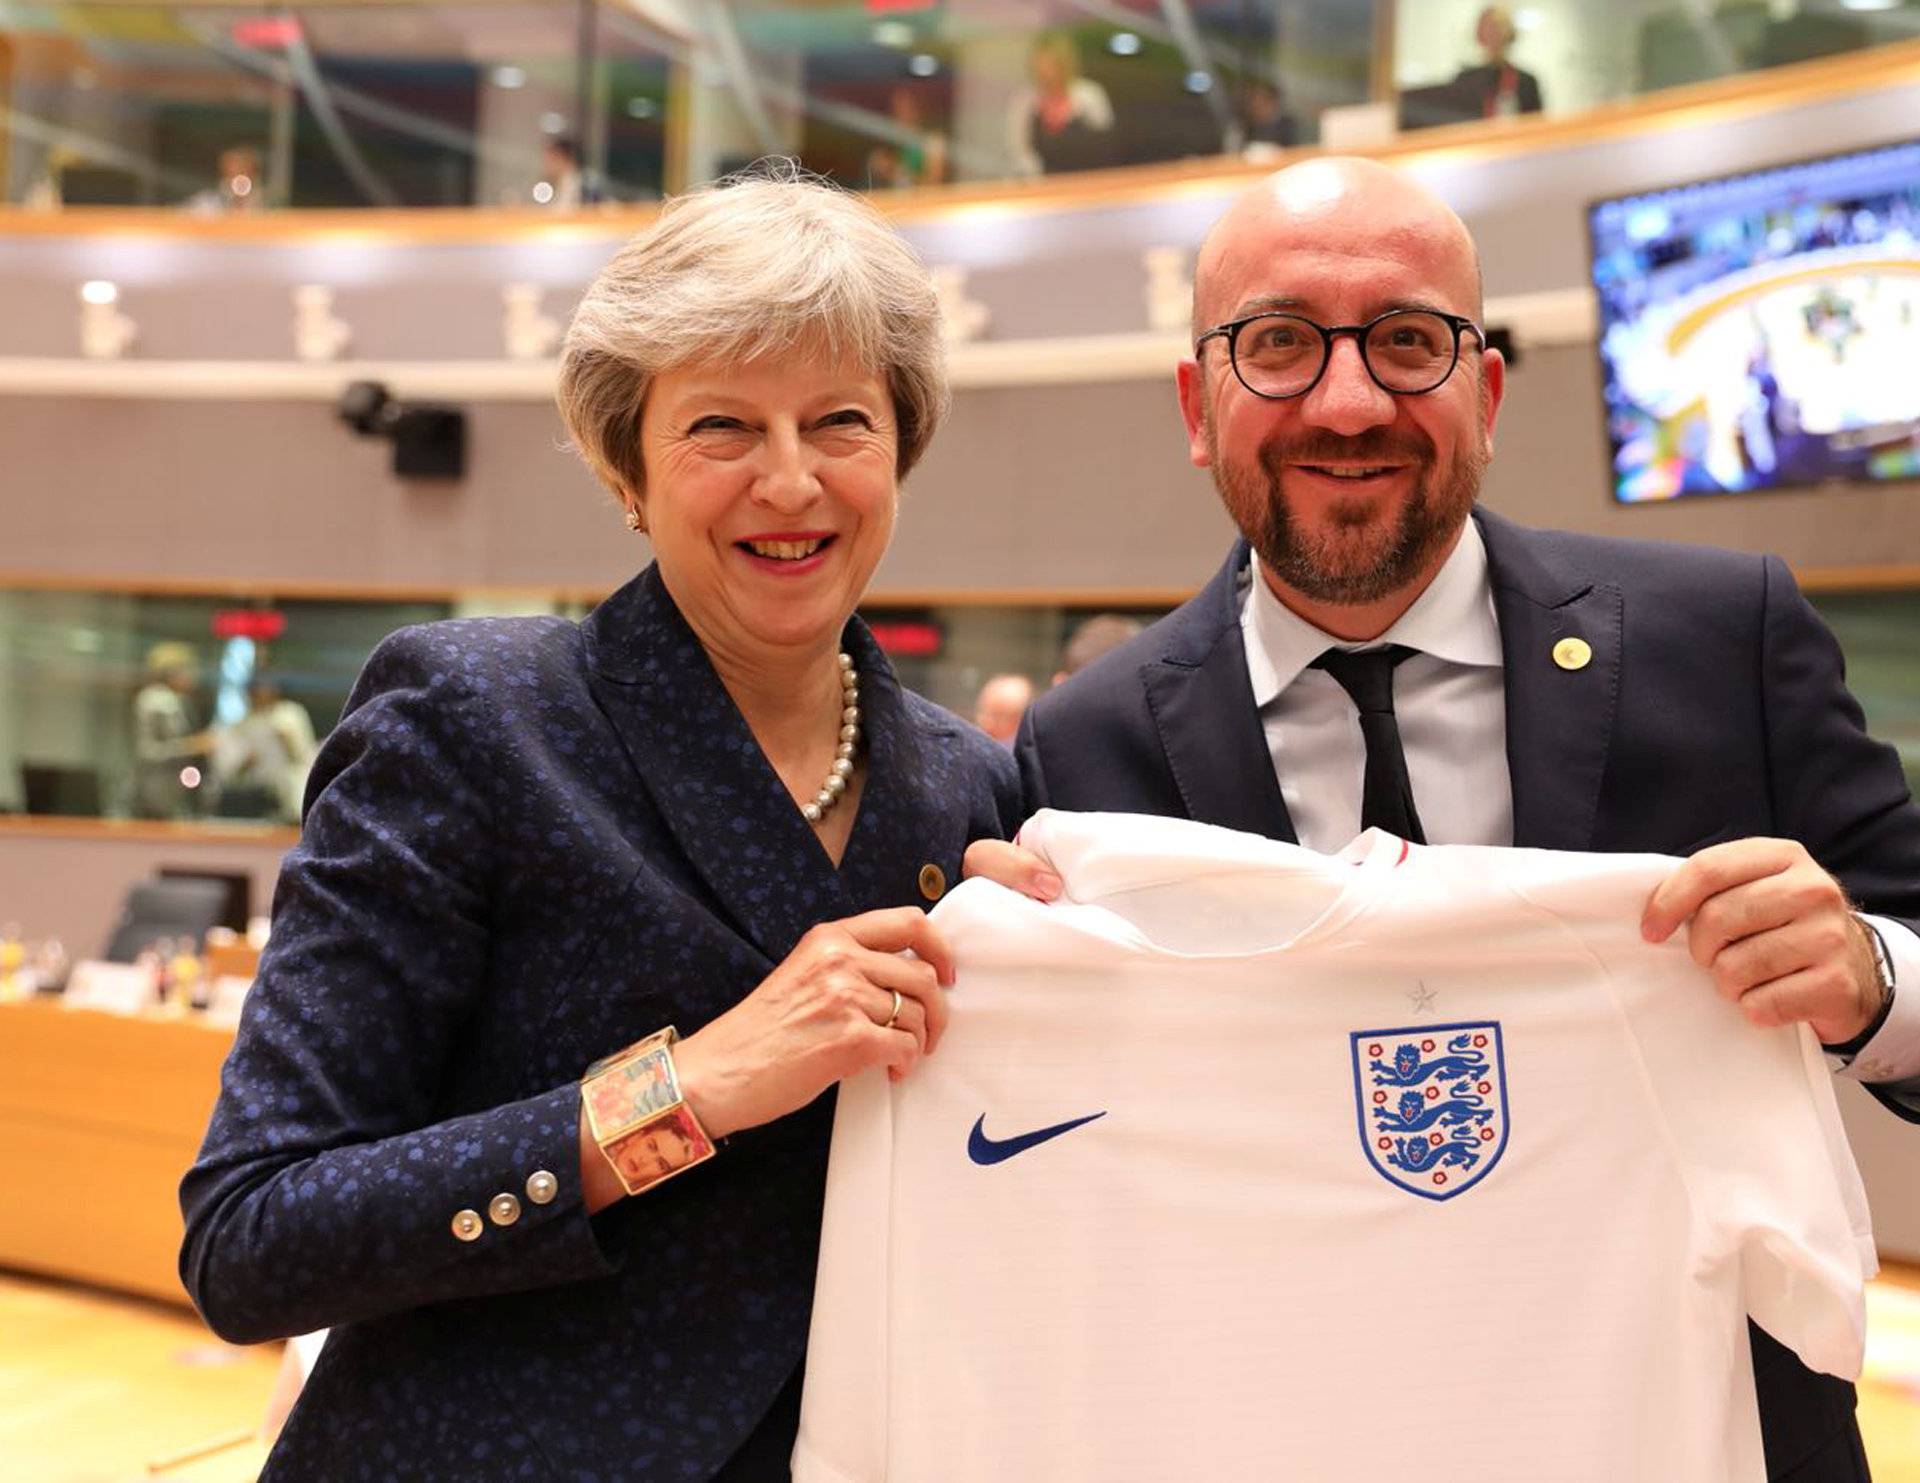 Belgian PM Michel receives England's national soccer team jersey from Britain's PM May as they attend an EU leaders summit in Brussels